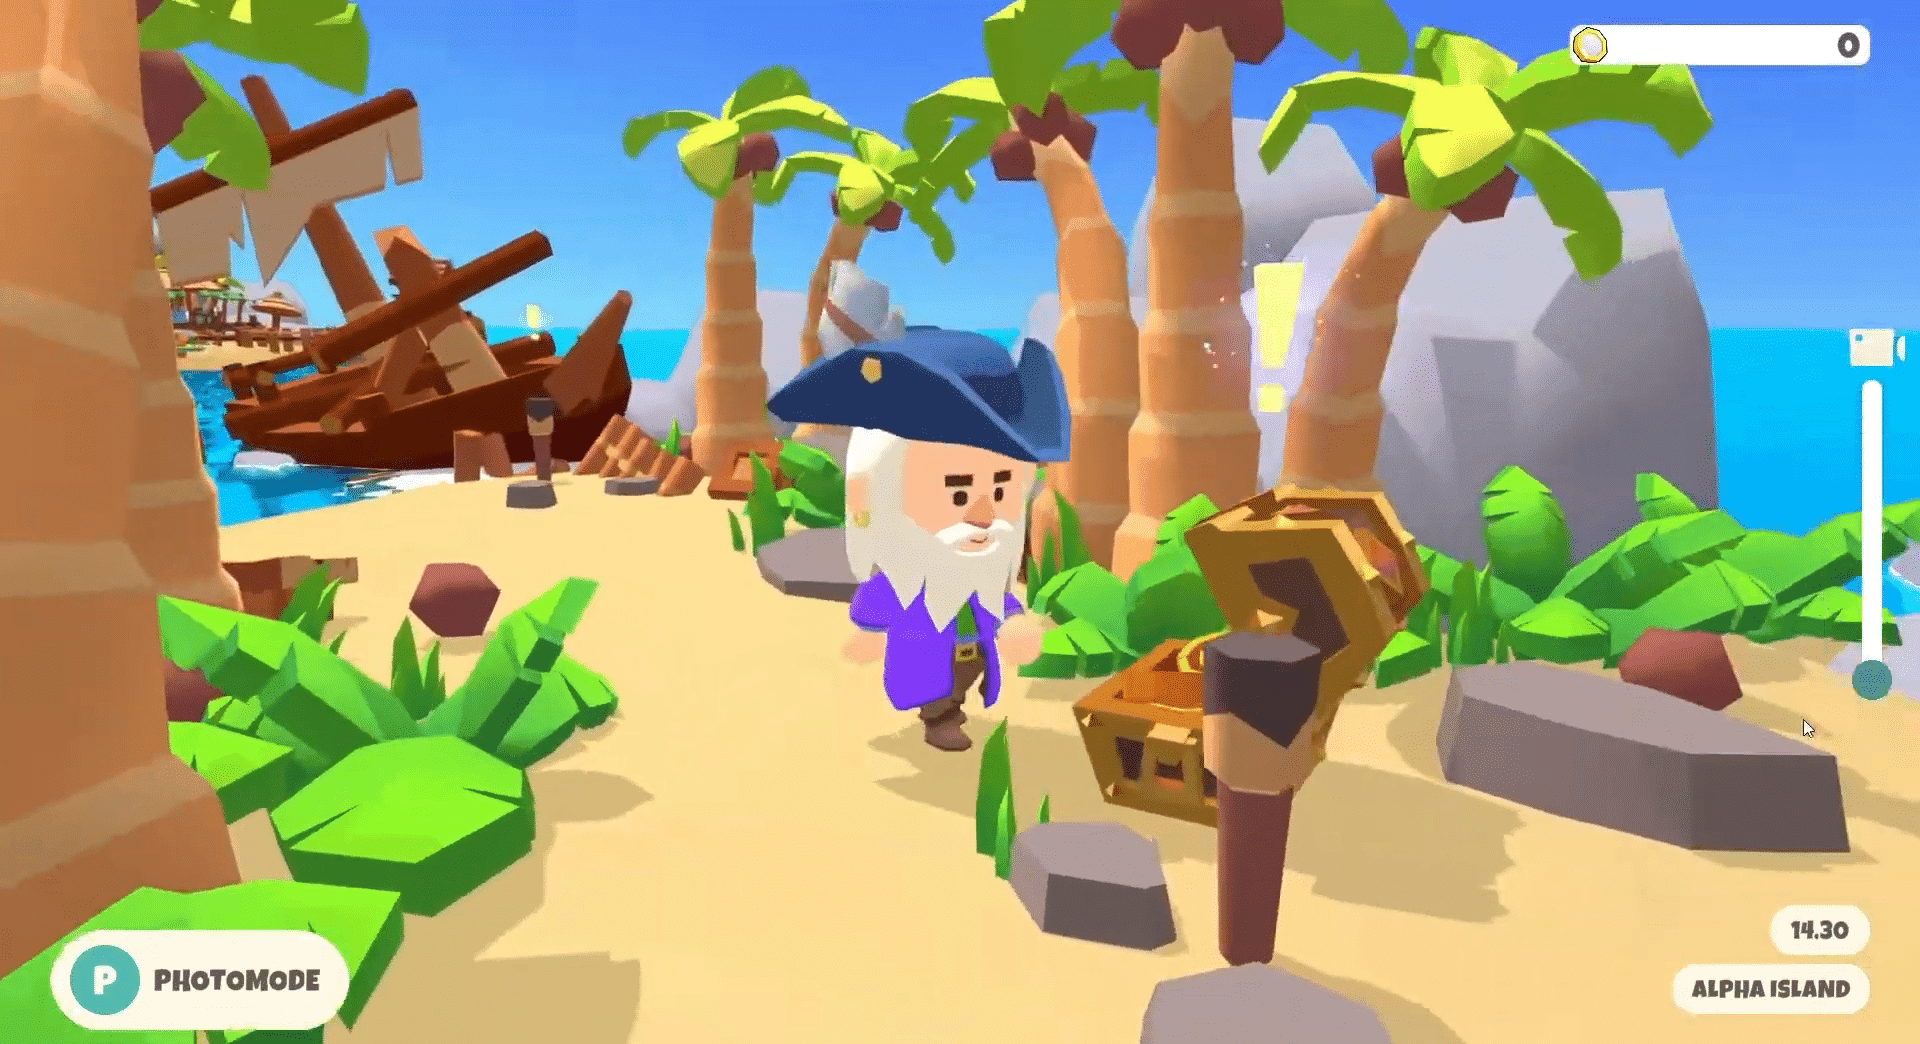 Paradise Tycoon - Harvest Season offers a tranquil web3 game, providing players with a laid-back and enjoyable NFT gaming adventure.